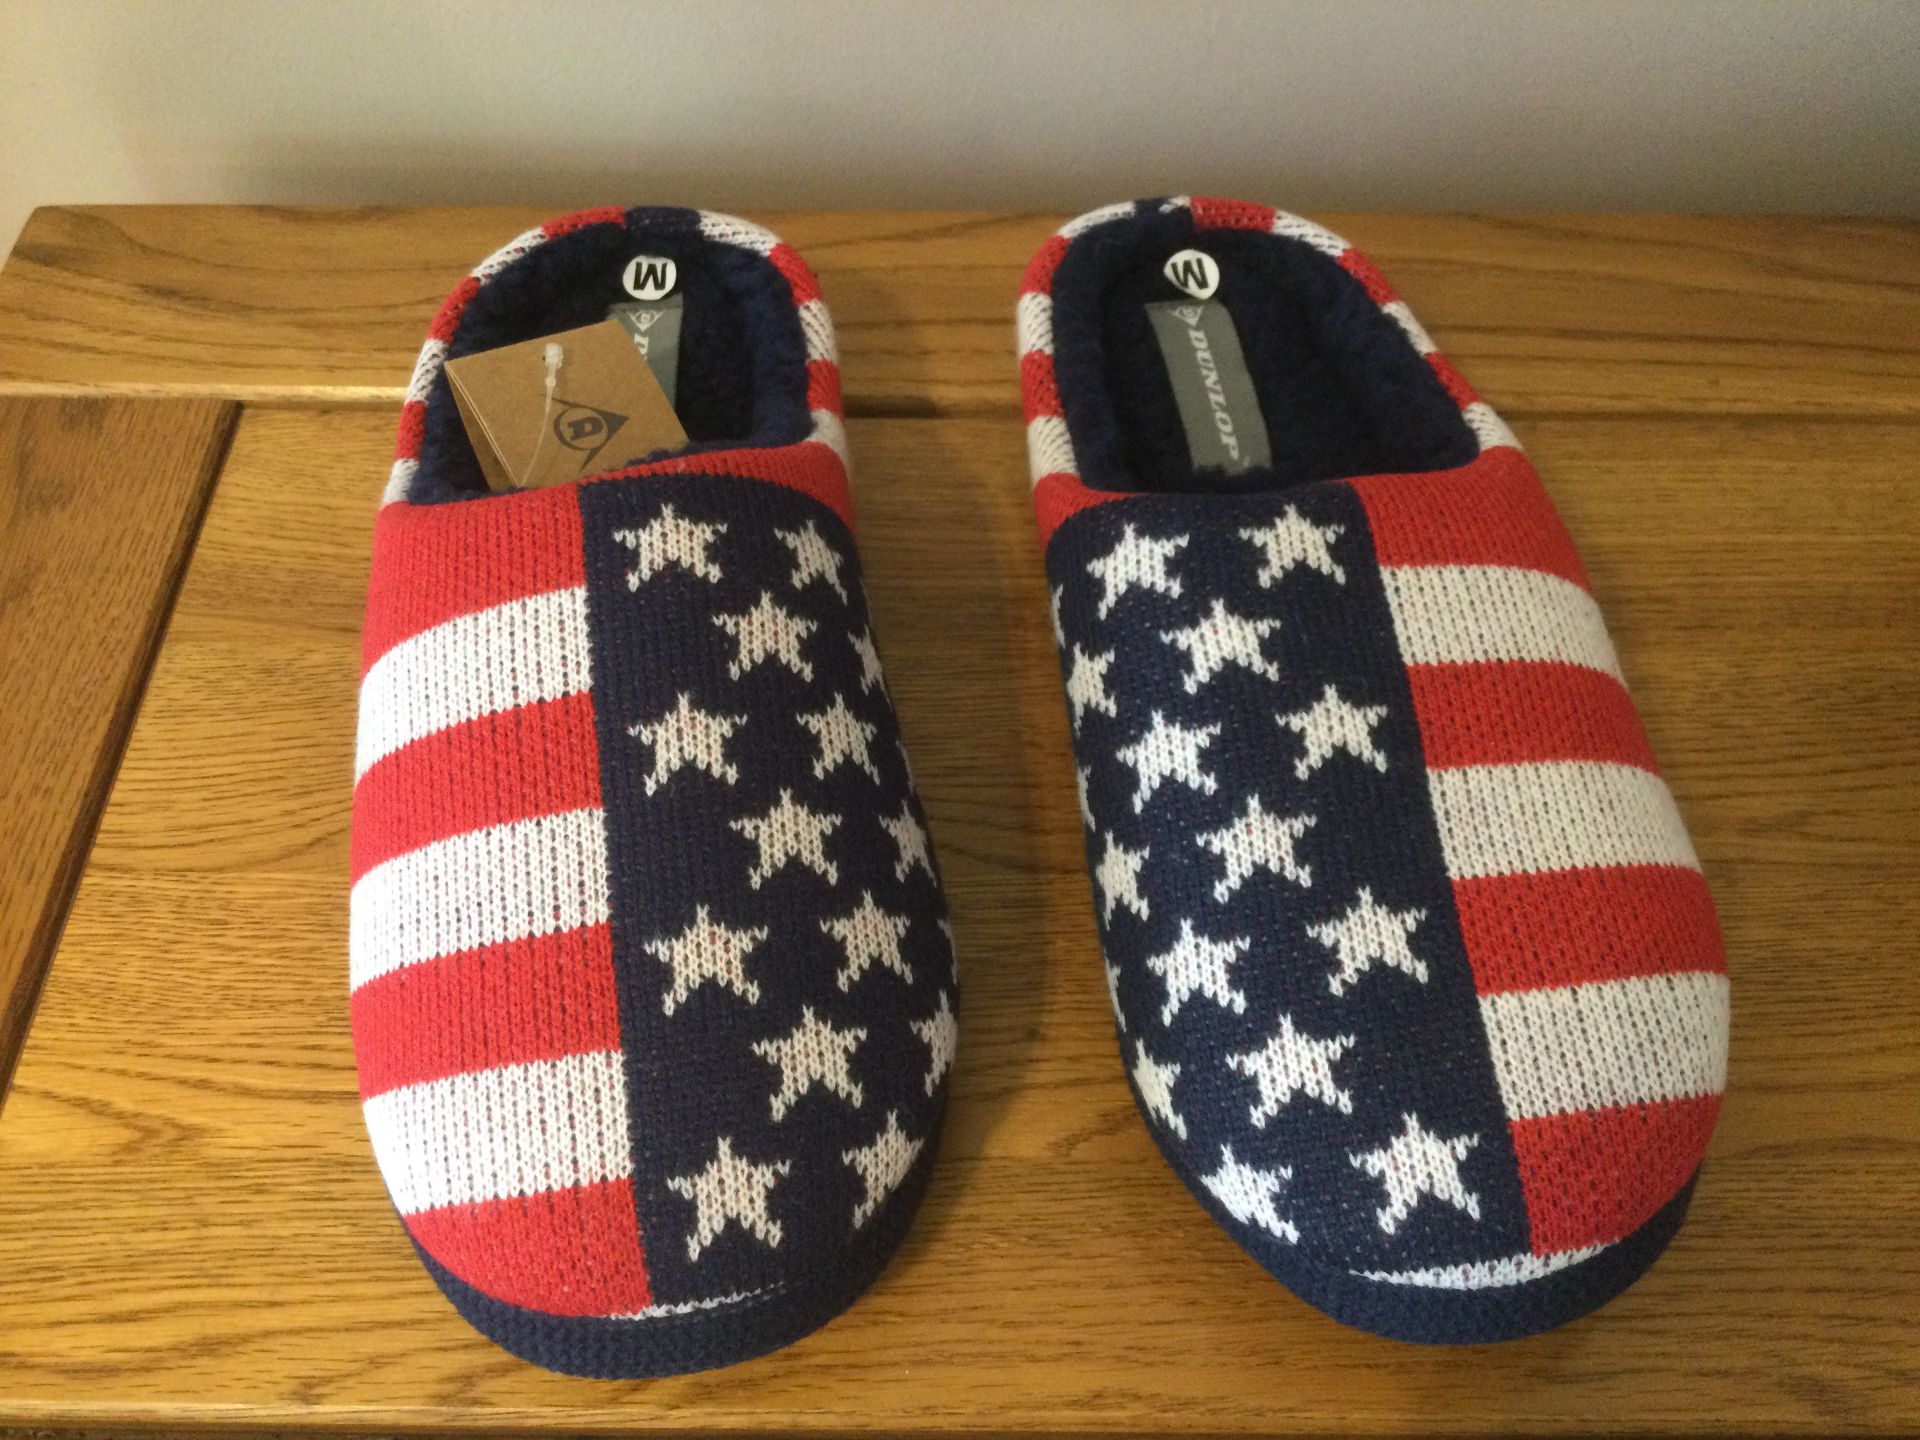 Job Lot 10 x Men's Dunlop, “USA Stars and Stripes” Memory Foam, Mule Slippers, Size M (8/9) - Image 2 of 7